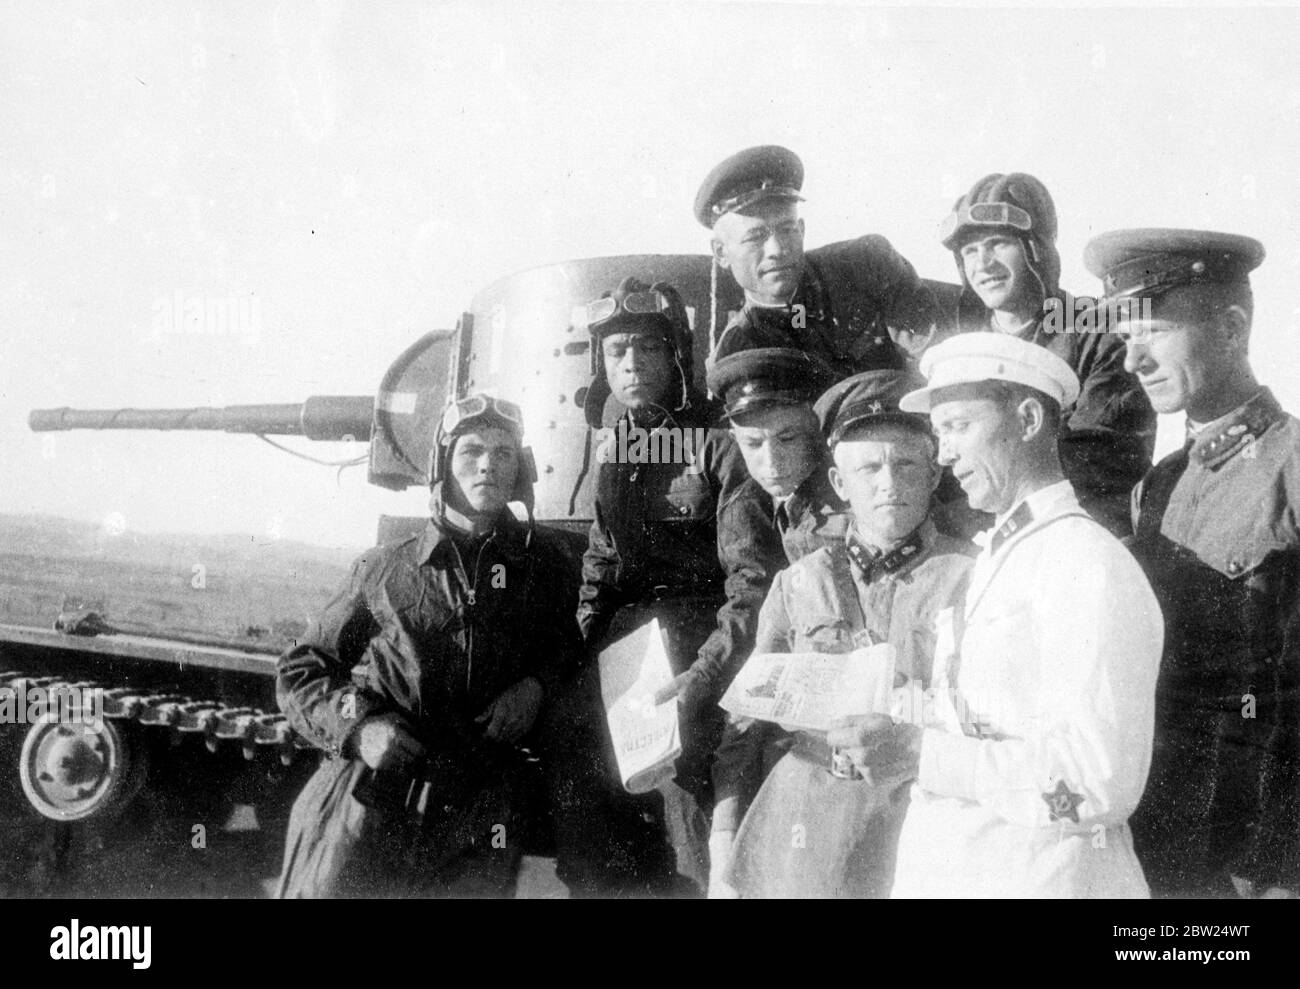 First pictures from the Soviet - Manchukuo front. This picture is the first to arrive from the Soviet Manchukuo front, where there has been severe fighting between the Soviet and Japanese forces, and shows a Soviet tank commander reading to as men, a newspaper account of the armistice agreed upon by the two counties. 21 August 1938 Stock Photo